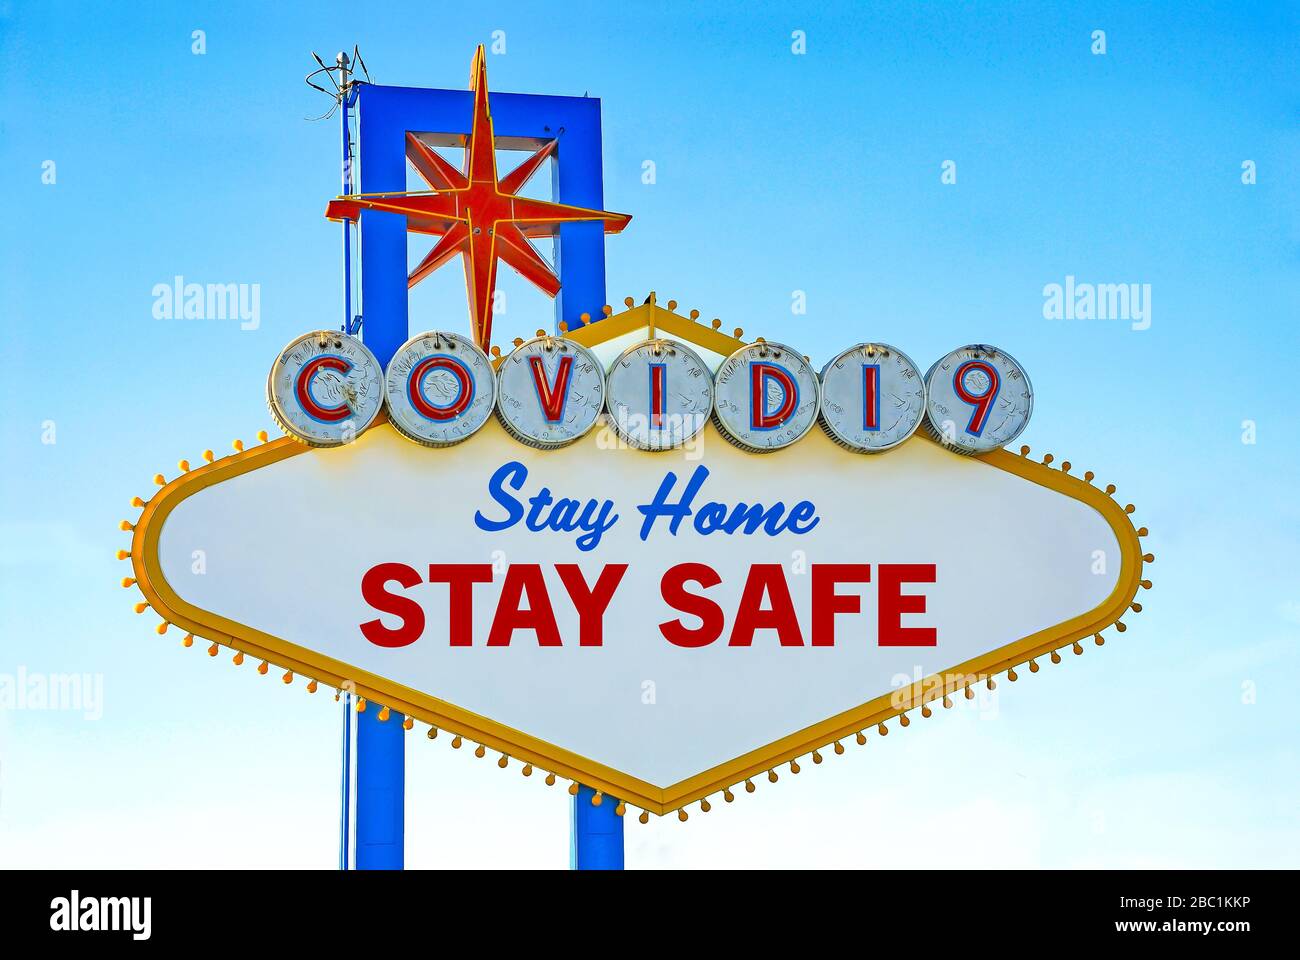 COVID-19 Stay Home Stay Safe Sign Stock Photo